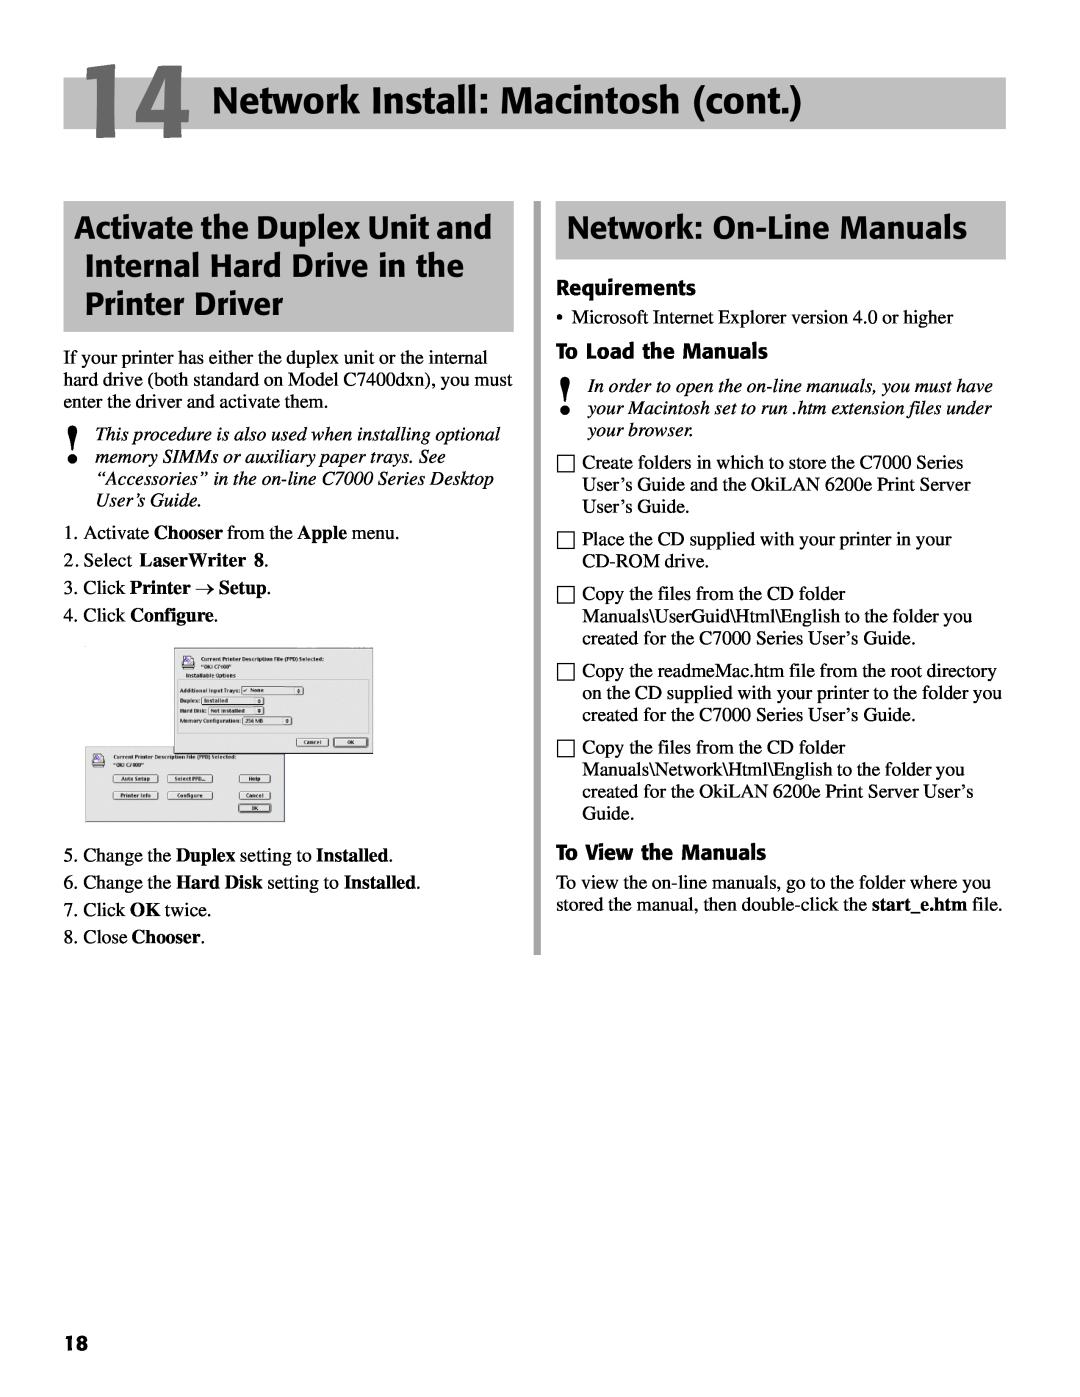 Oki C7000 Network Install Macintosh cont, Network On-Line Manuals, Activate the Duplex Unit and Internal Hard Drive in the 